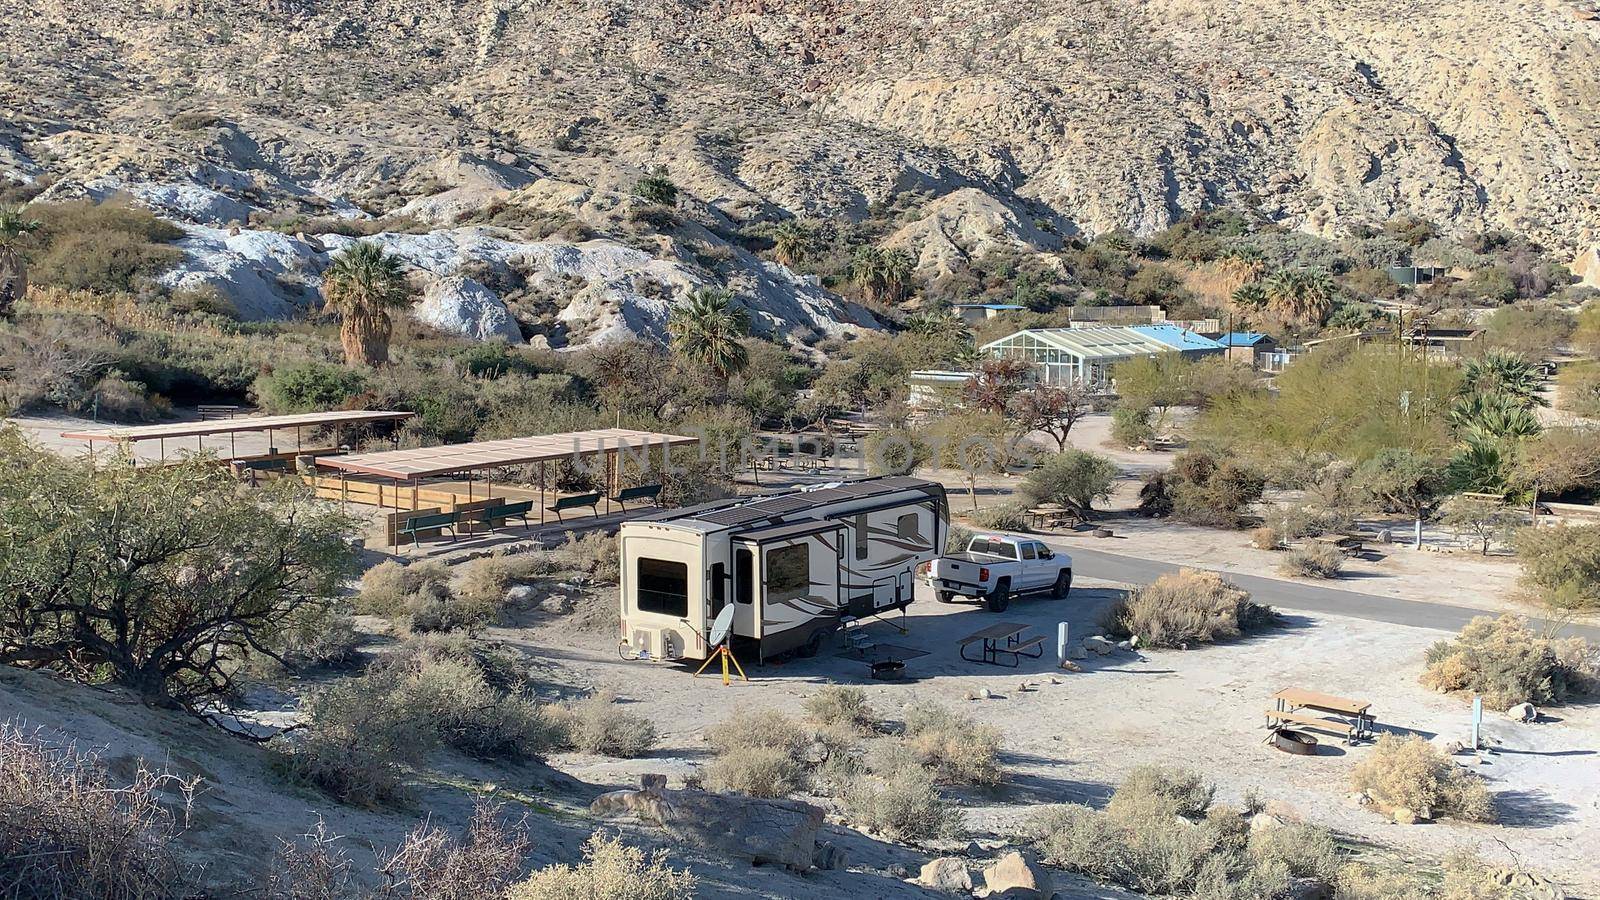 Rving in the desert southwest with a fifth wheel and solar